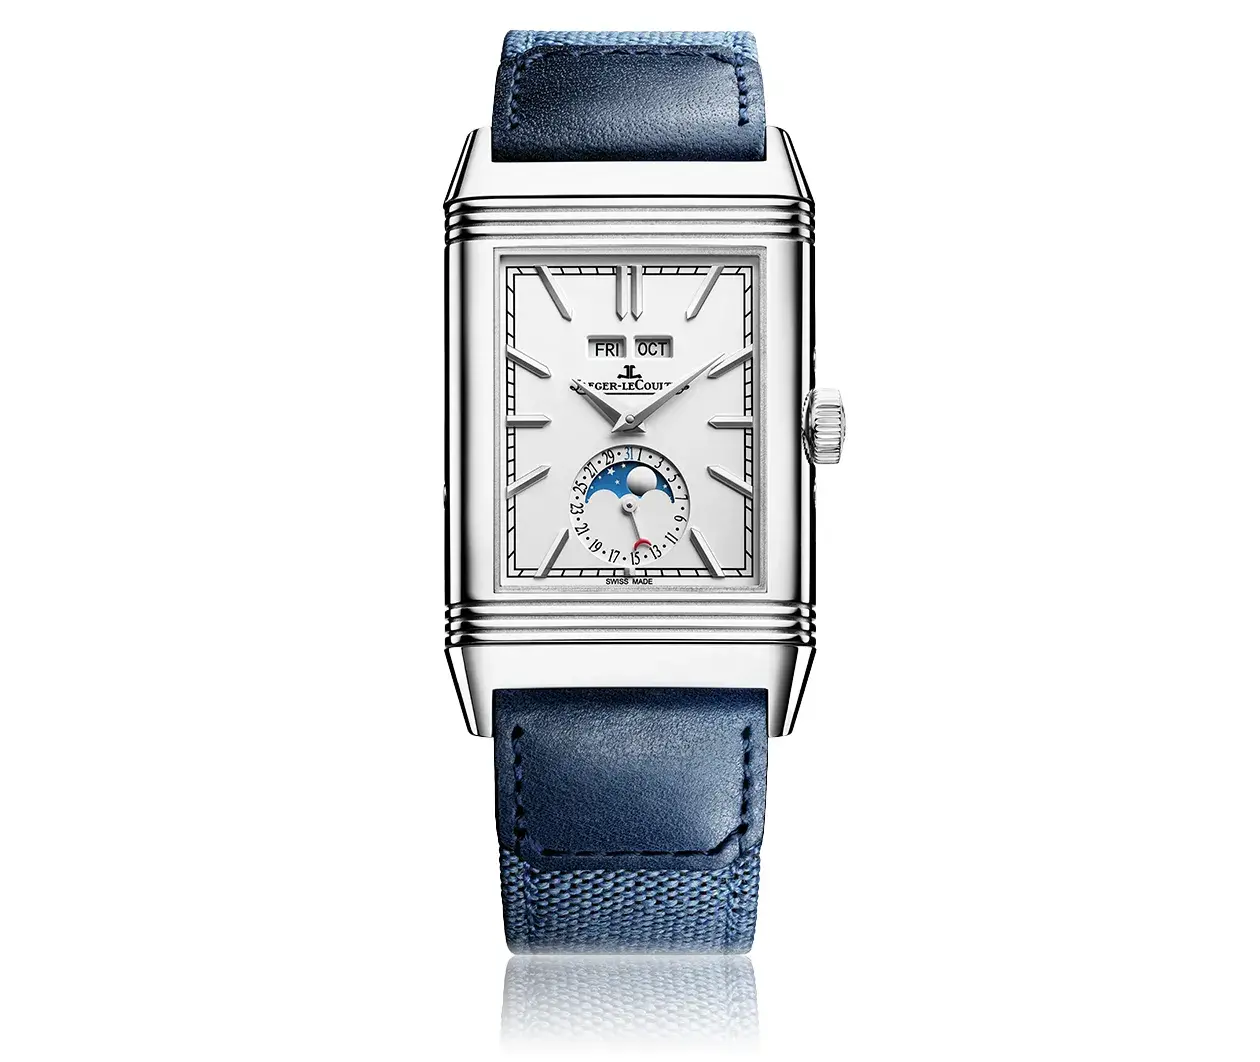 Jaeger LeCoultre Watches, Mens & Ladies JLC Watches for Sale Online |  Watches Of Switzerland US